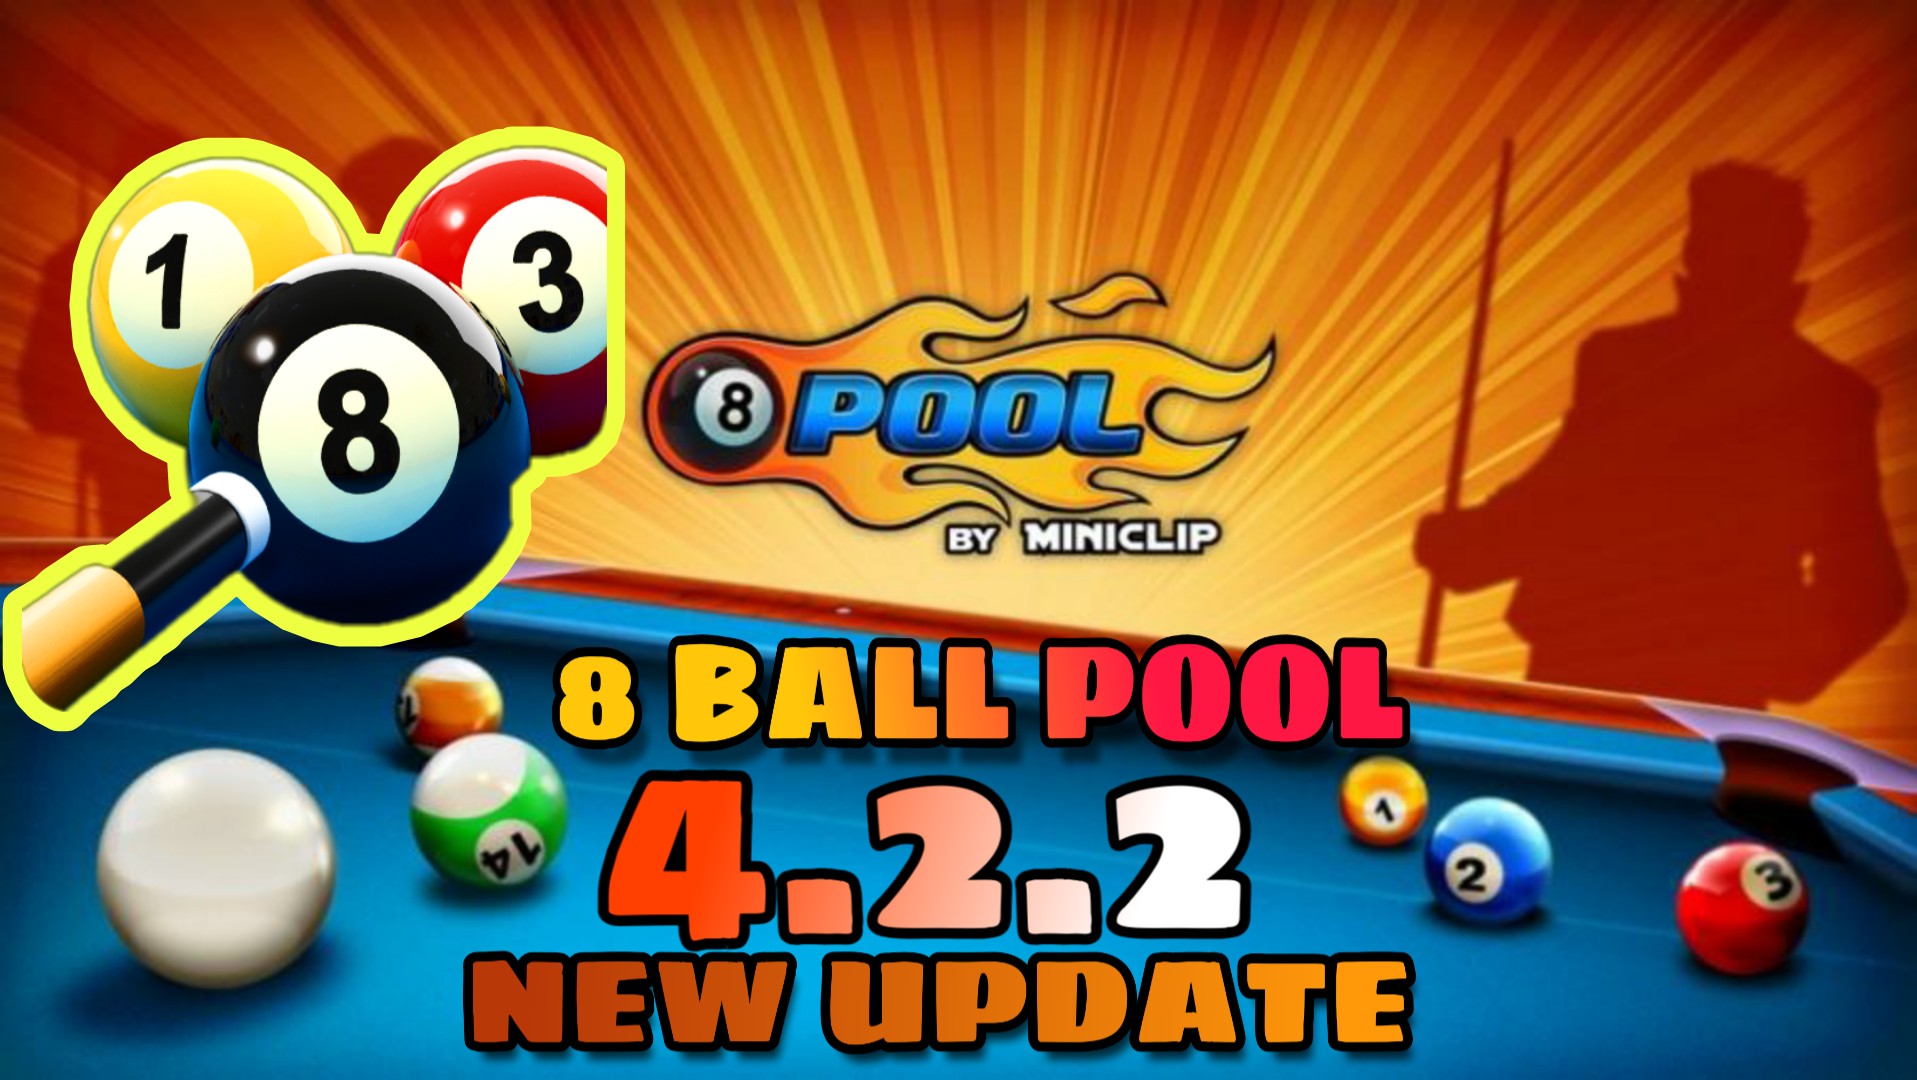 8Ball Pool 4.2.2 For Android/ New Update/New Event Added ... - 